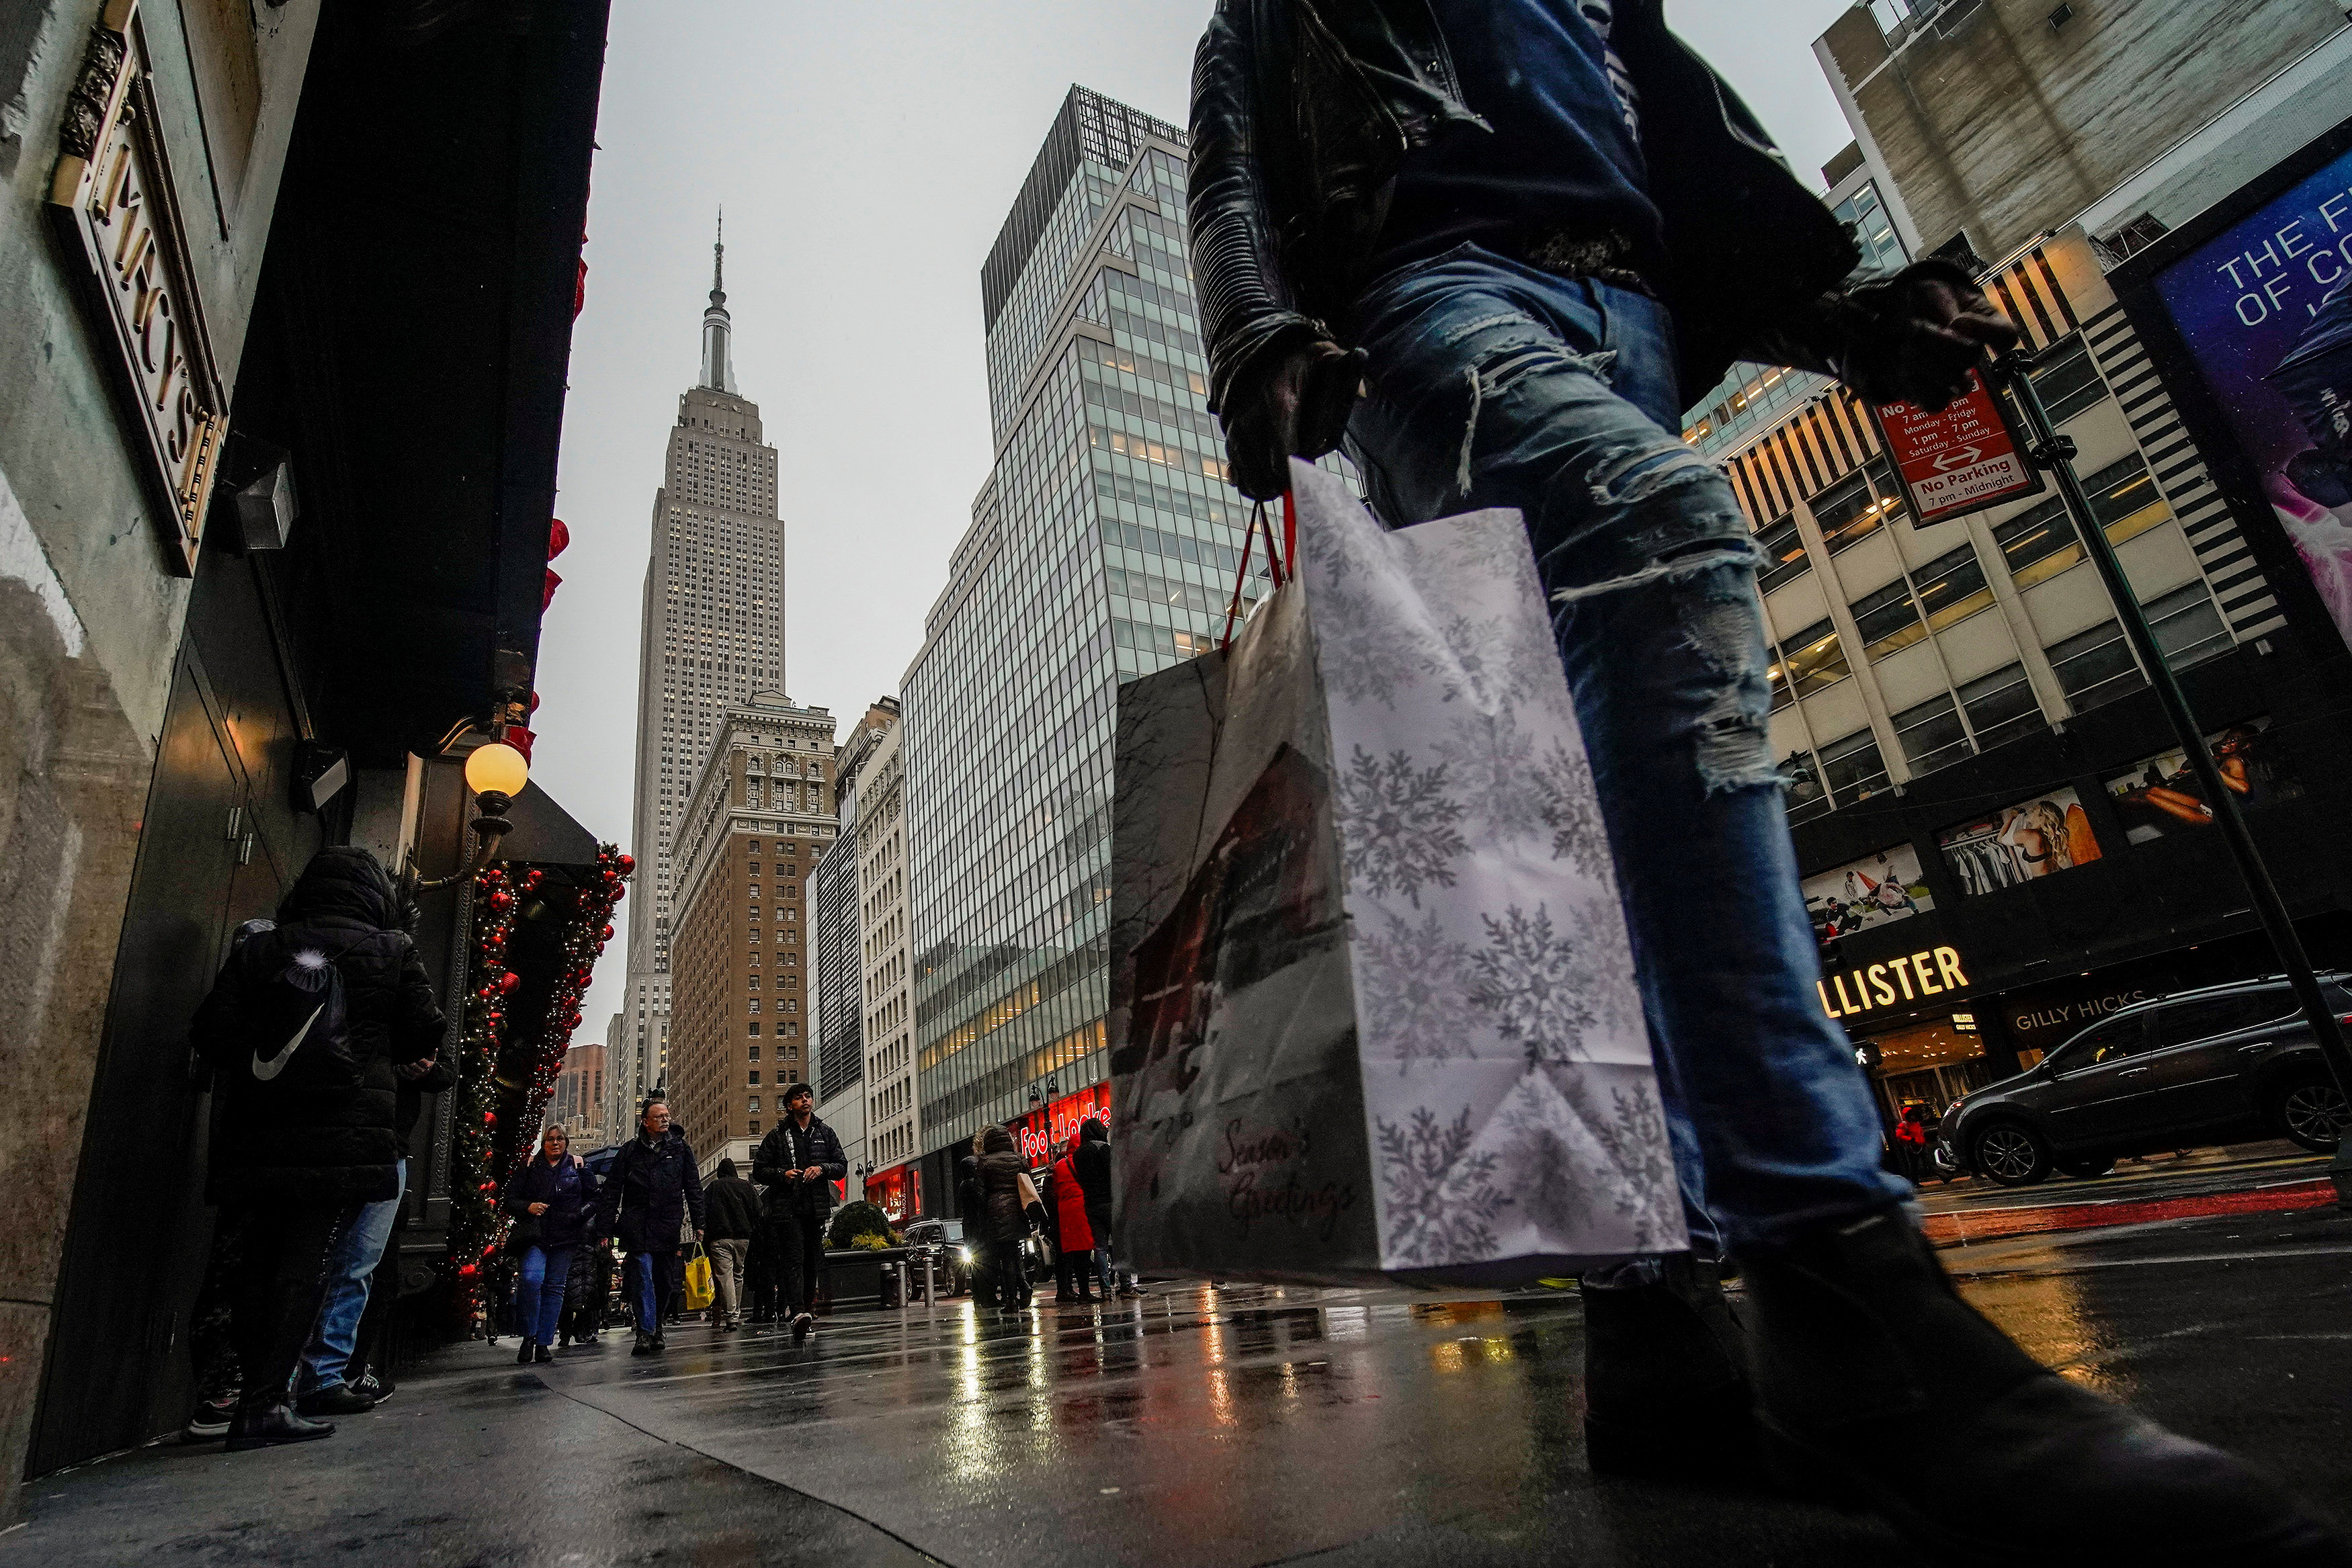 People carry shopping bags during the holiday season in New York